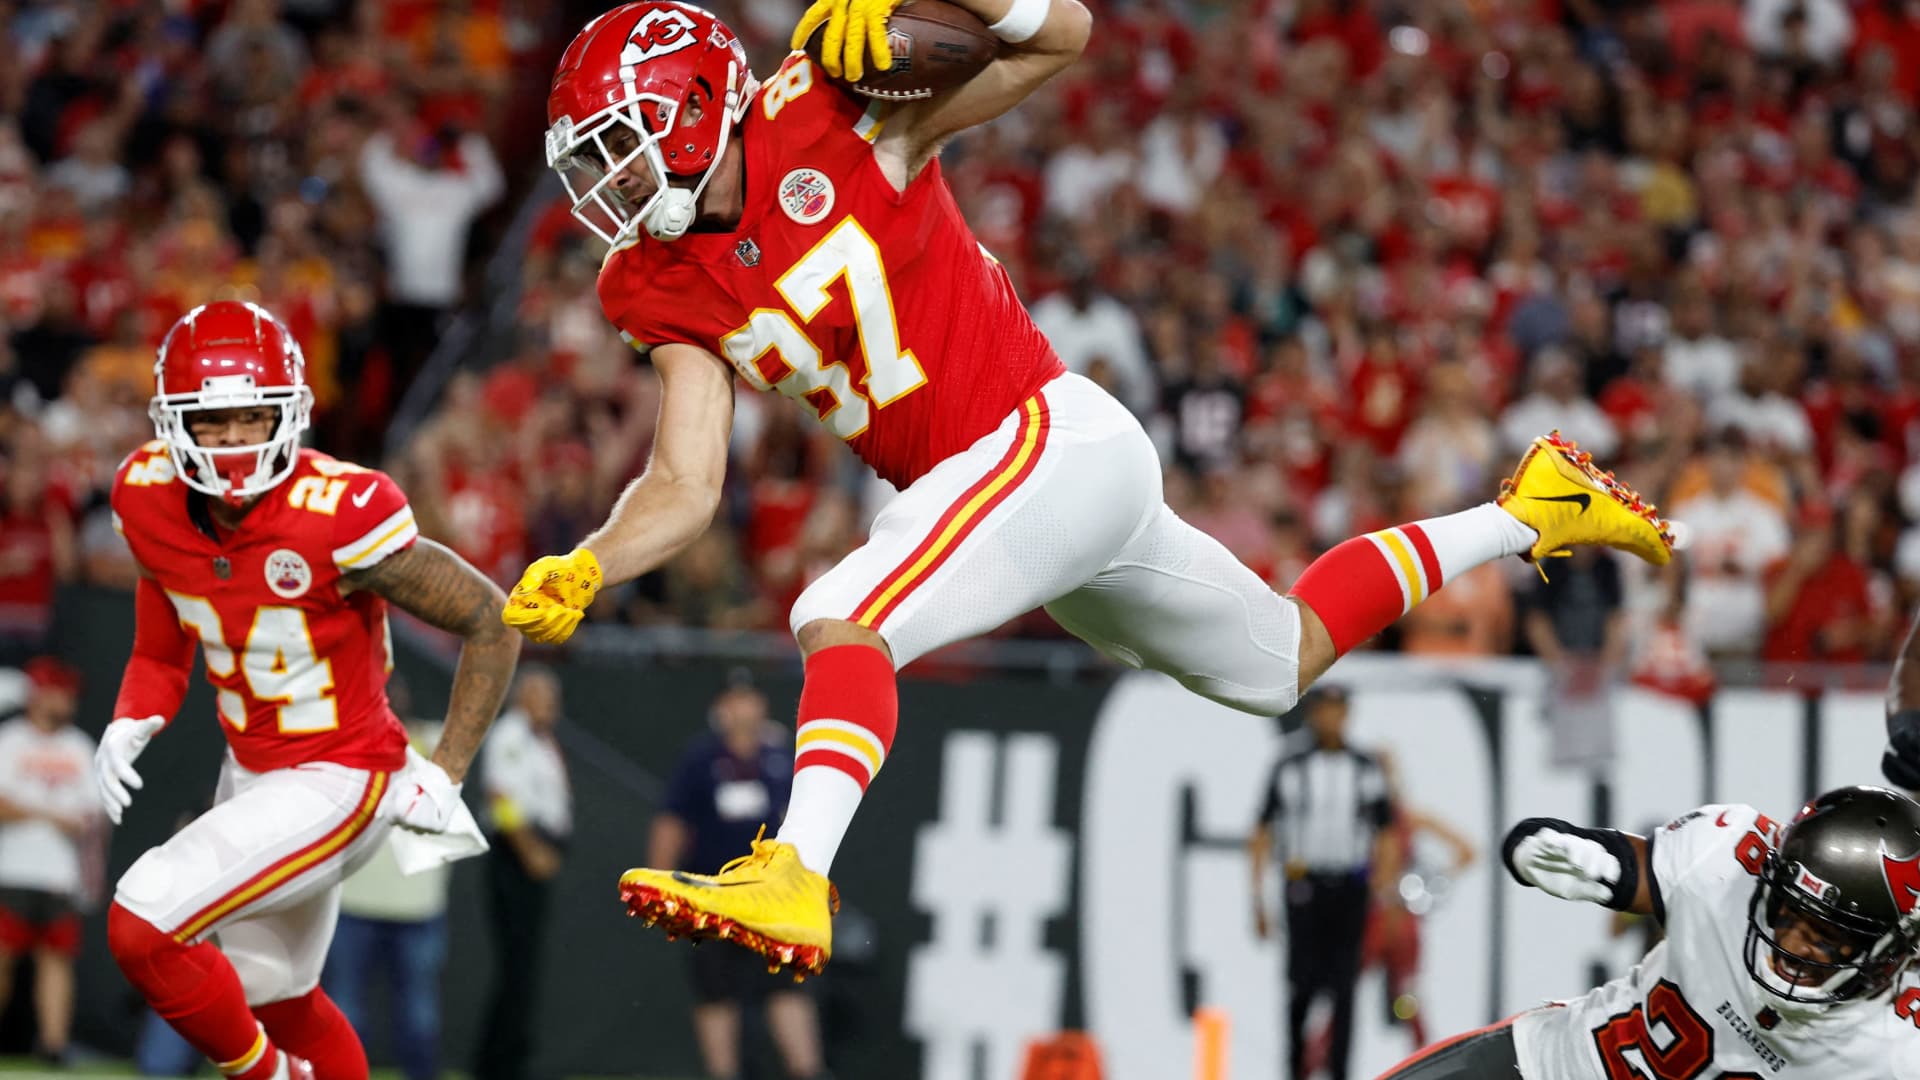 Kansas City Chiefs tight end Travis Kelce (87) runs the ball in for a touchdown against the Tampa Bay Buccaneers during the first quarter at Raymond James Stadium, Oct. 2, 2022.